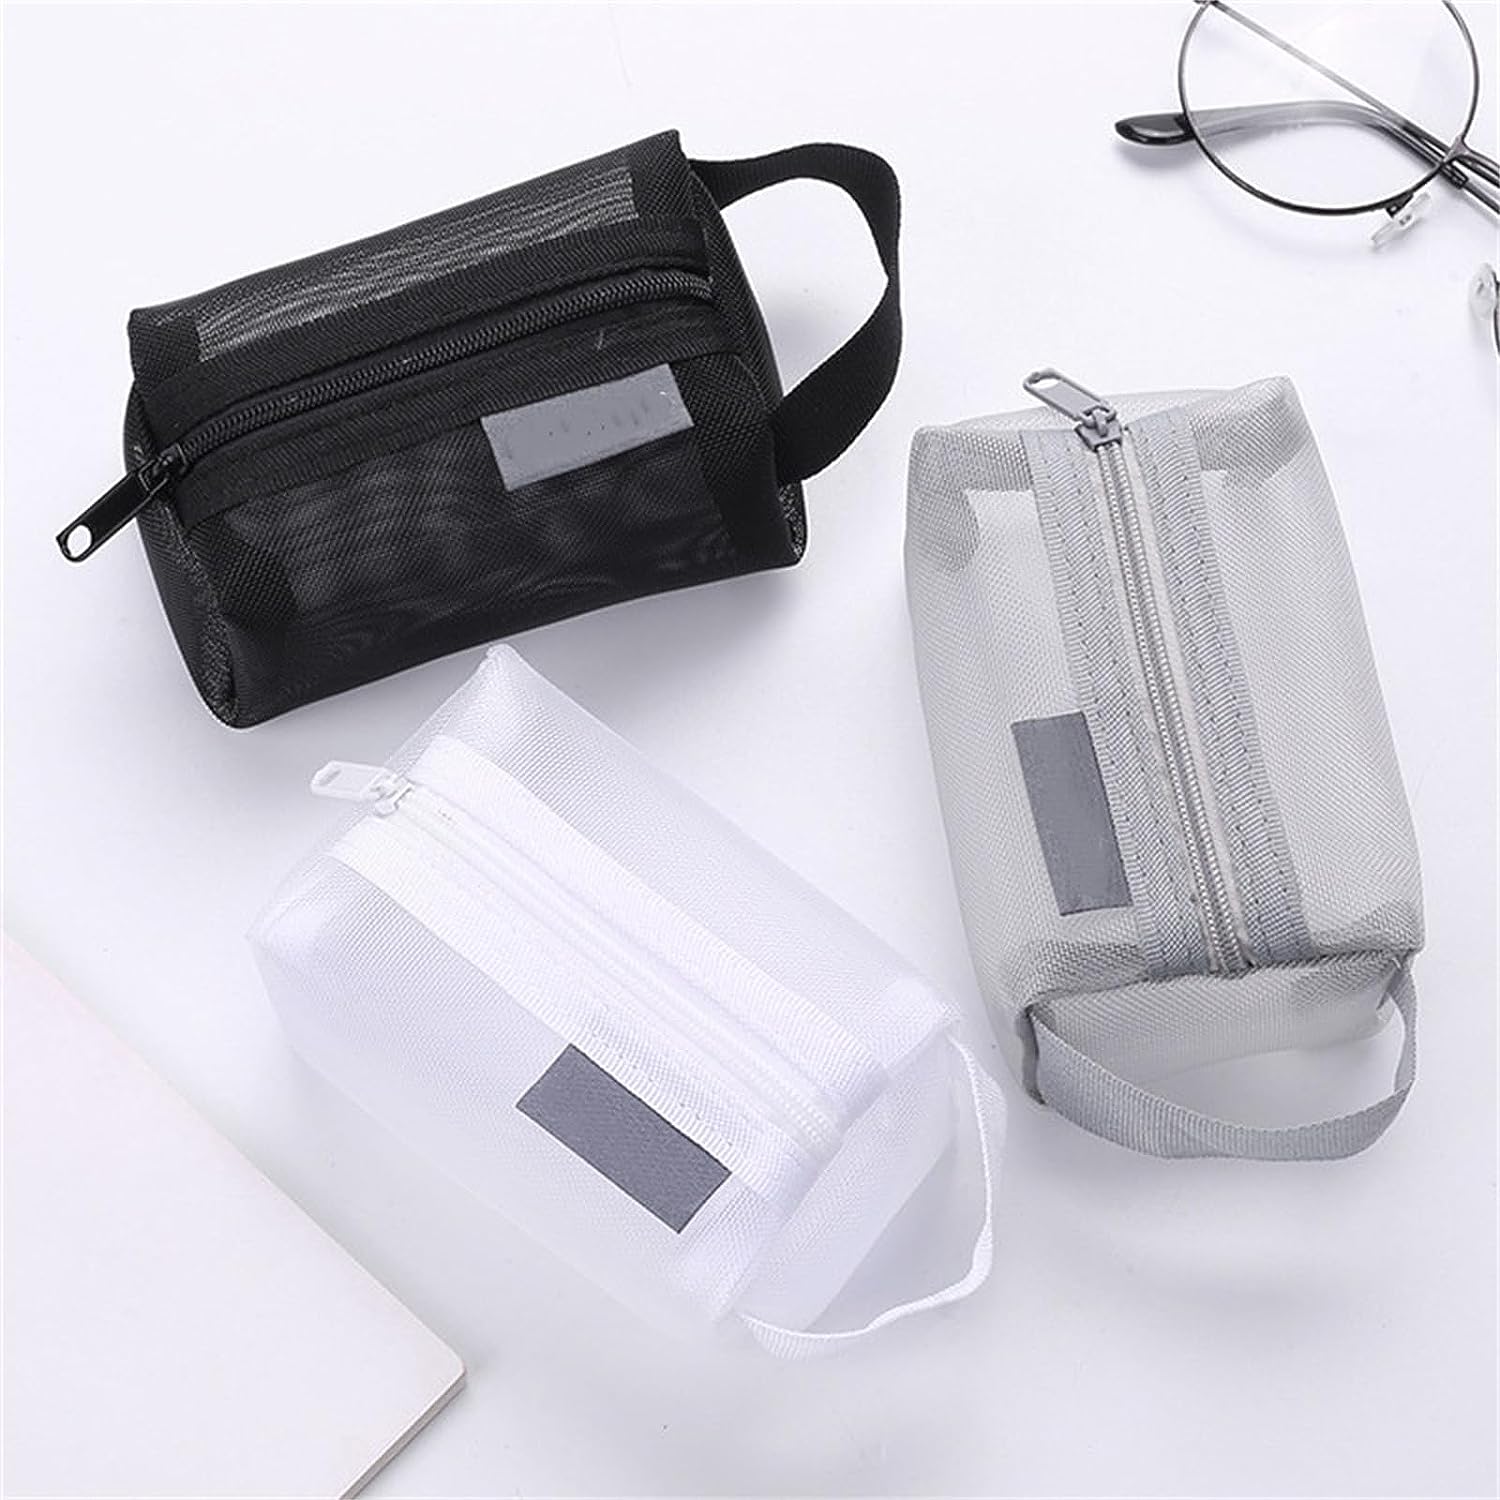 3 PCS Mesh Makeup Bags Storage Pocket Mesh Cosmetic Bag Portable Travel  Organizing Zipper Pouch Toiletries Makeup Pouches For Home Office Travel